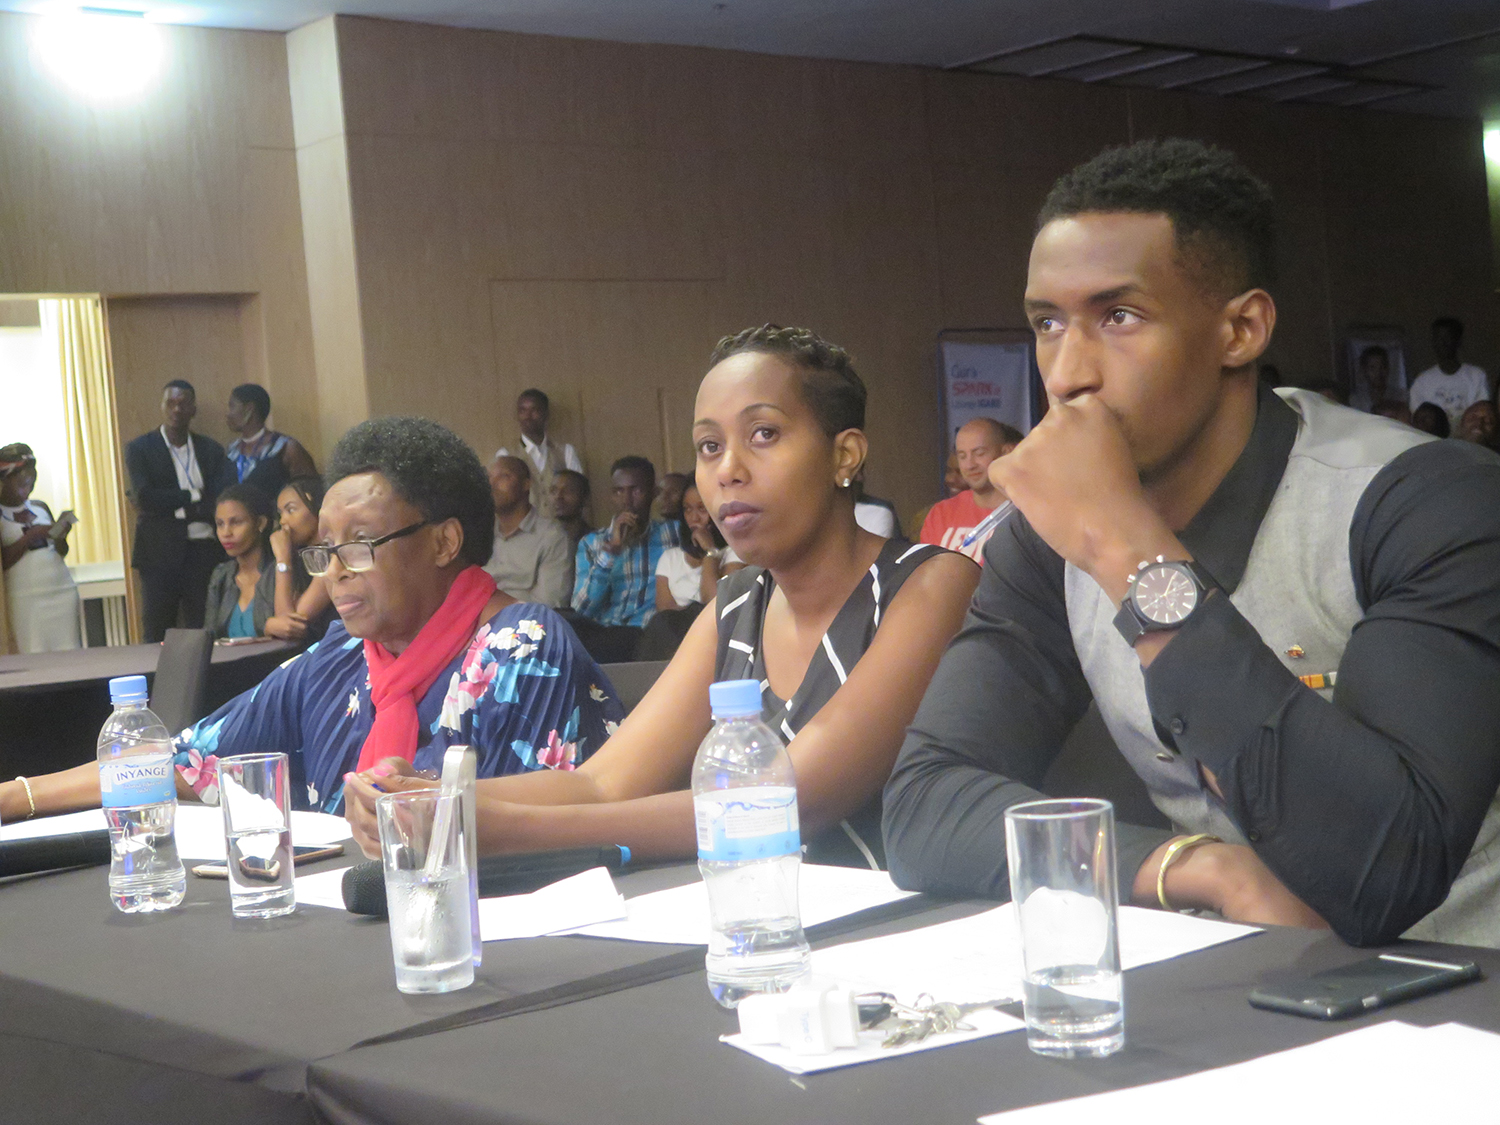 The panel of judges was led by Rwandaâ€™s top model and Mister Africa International 2017 Jay Rwanda (right).